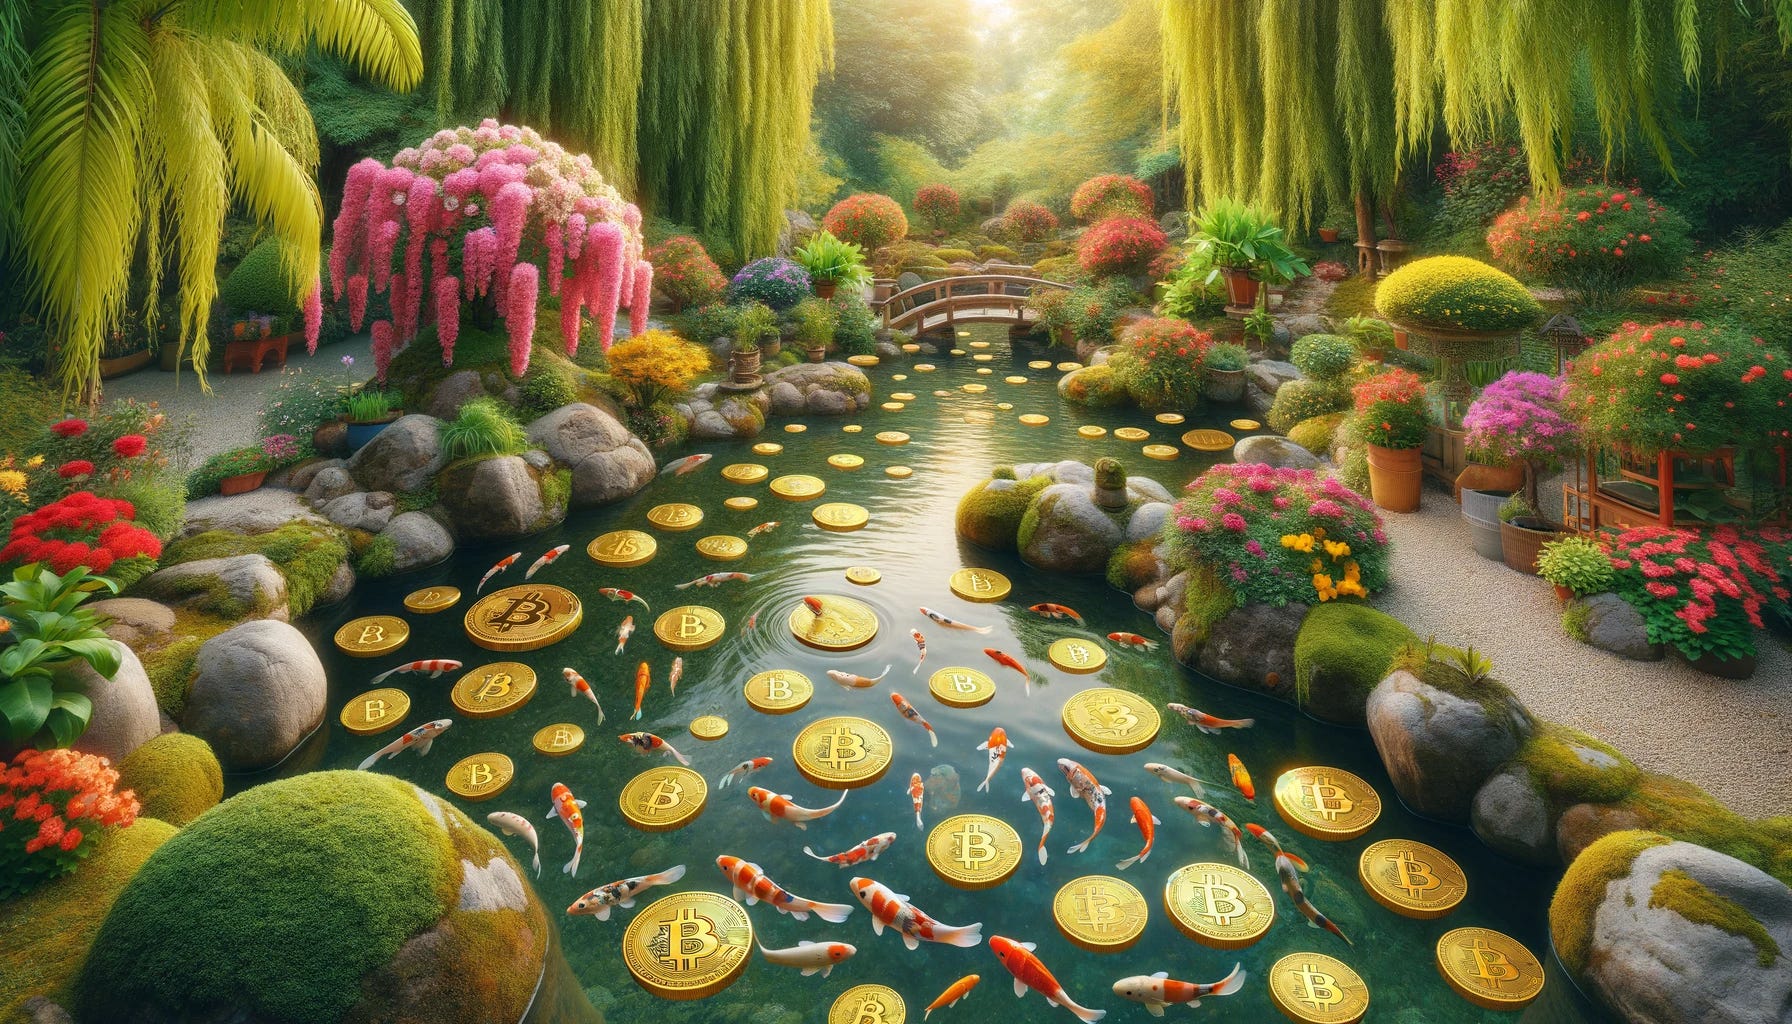 A whimsical landscape scene of a koi fish pond, enhanced with a greater abundance of Bitcoins. The tranquil pond, surrounded by lush greenery and blooming flowers, is filled with colorful koi fish swimming gracefully. In this imaginative version, the surface of the water is generously sprinkled with a larger quantity of miniature golden Bitcoins than before. These additional Bitcoins float densely on the water's surface, creating a striking and playful surreal element in the scene. The reflections of these numerous Bitcoins in the clear water enhance the visual effect, merging the natural beauty of the pond with the symbolic representation of cryptocurrency. The scene maintains a peaceful and serene atmosphere, illuminated by soft, natural sunlight, with the layout adapted to a wider perspective for visual impact.